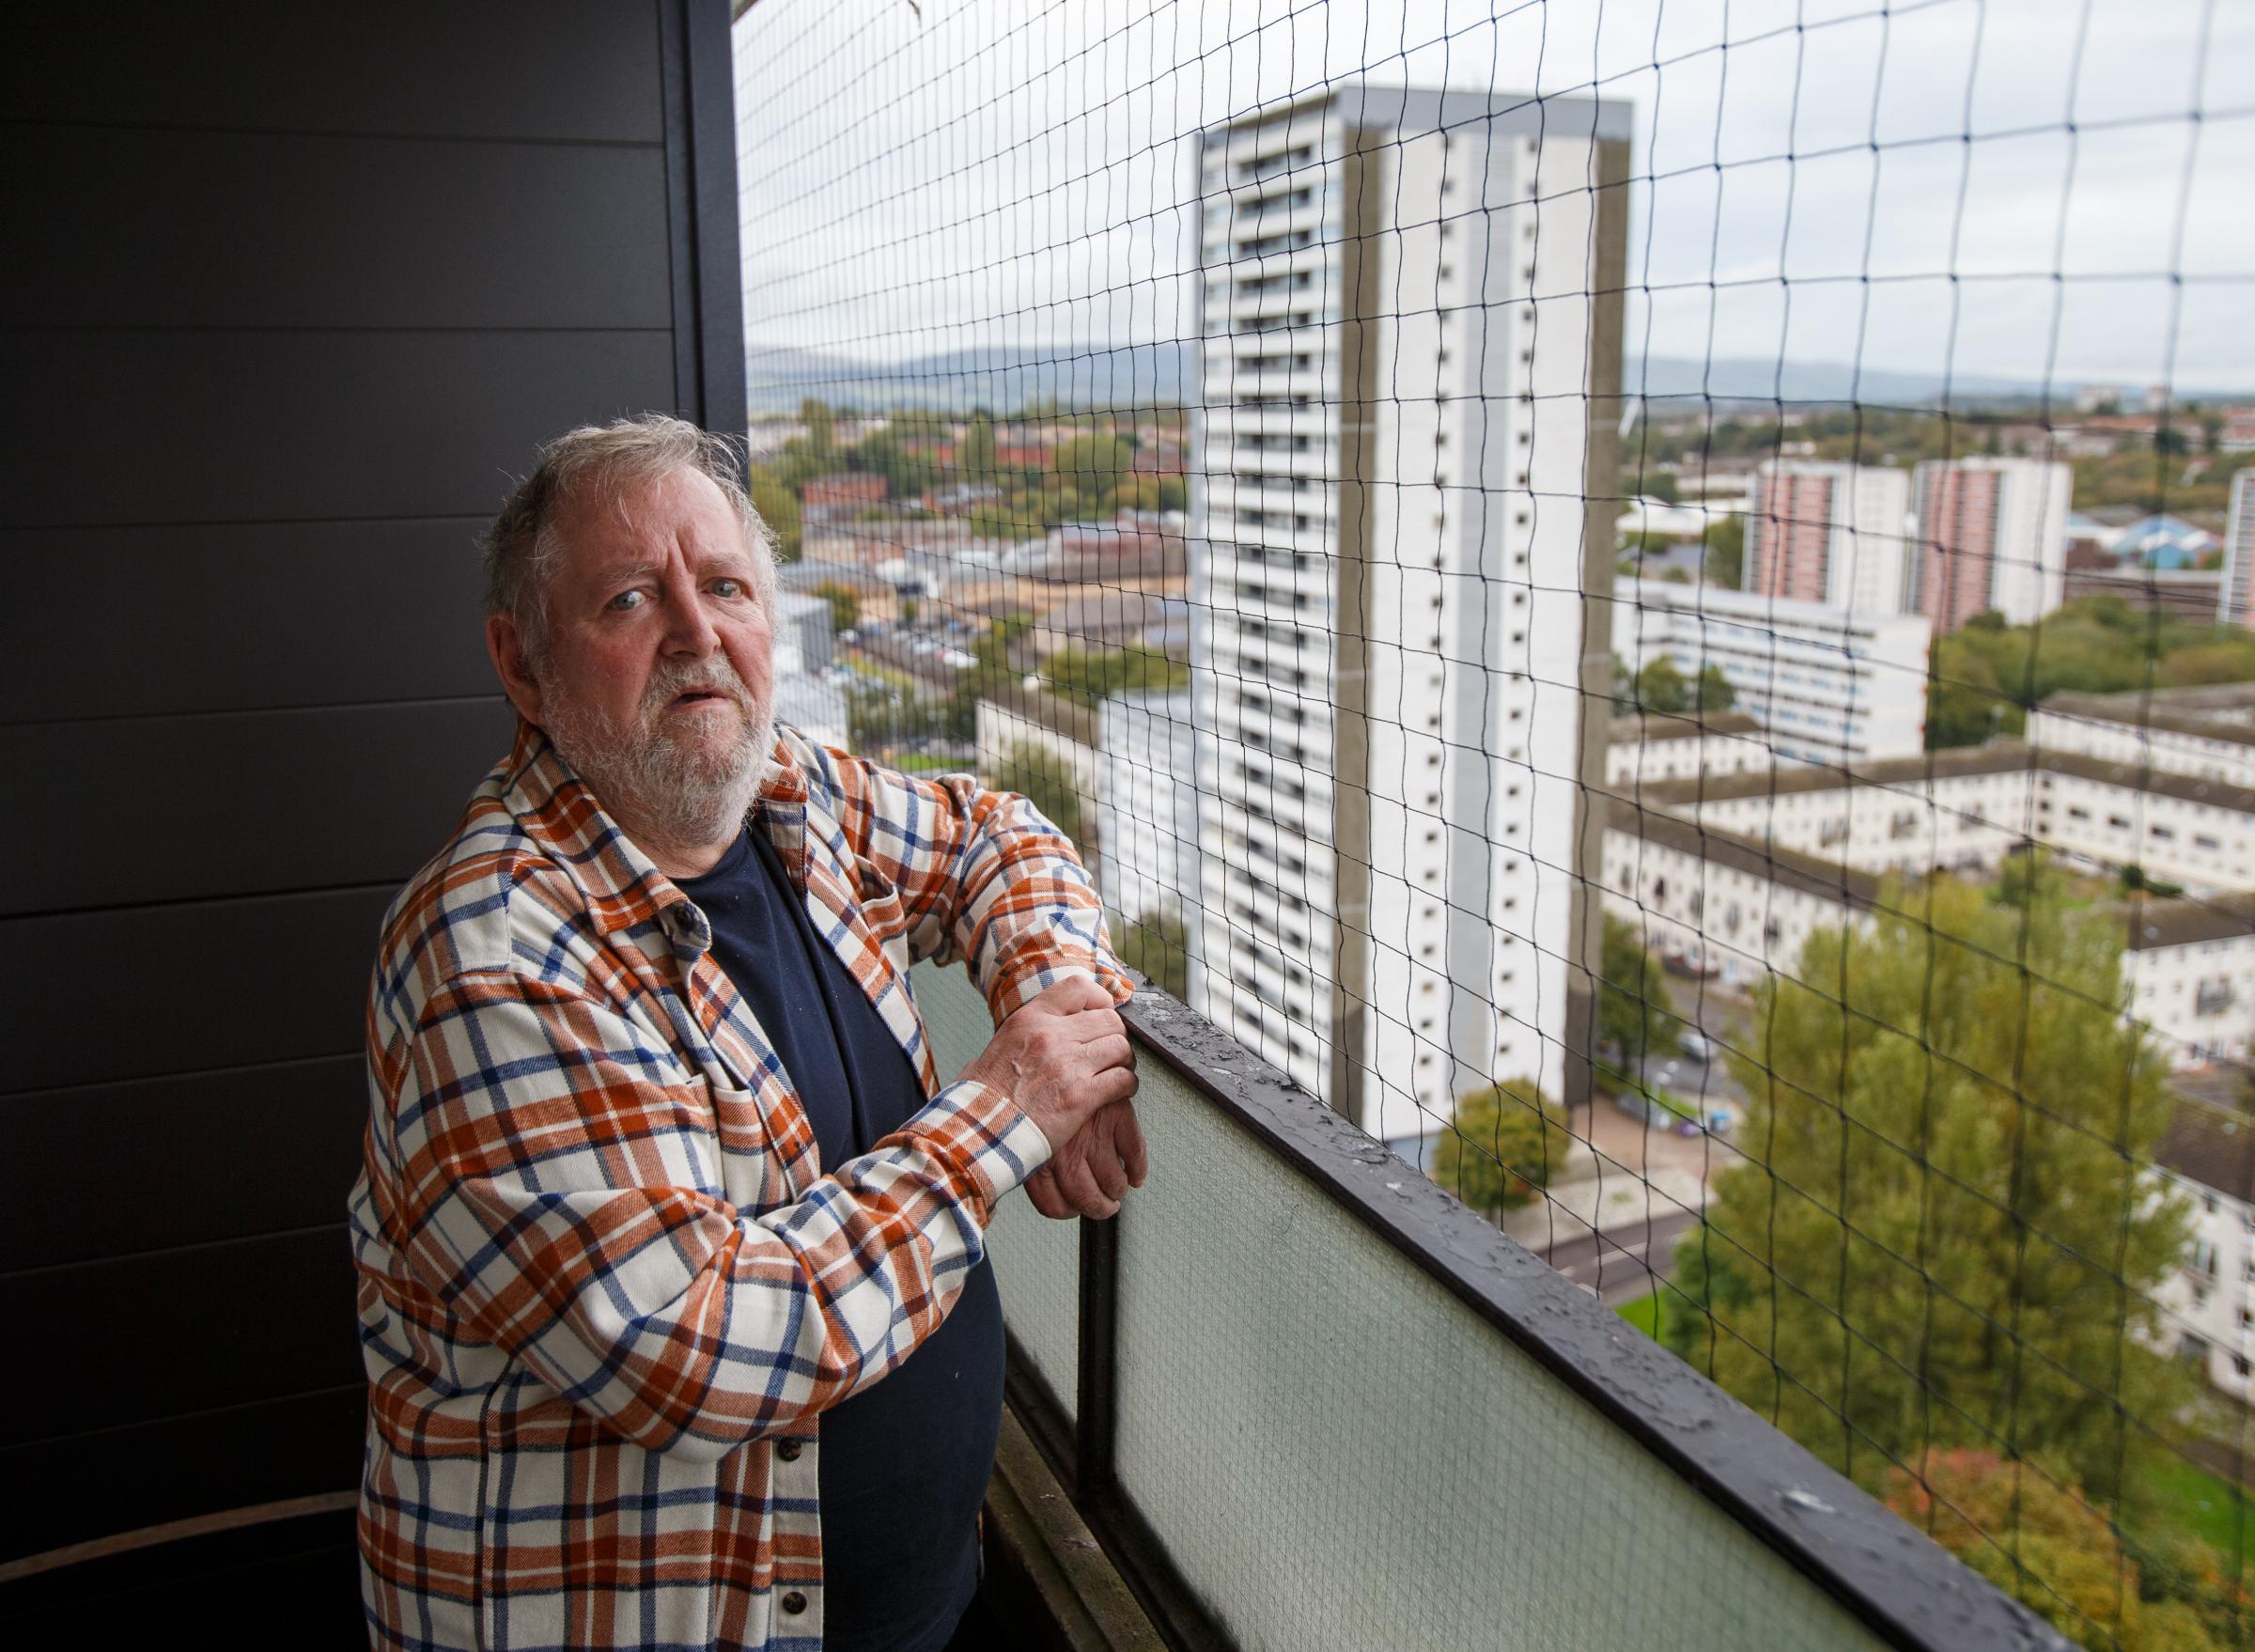 Gordon Goudie pictured on the balcony of his flat at 151 Wyndford Road, Maryhill. 151 is one of four tower blocks in the Wyndford that are earmarked for demolition. Photograph by Colin Mearns.